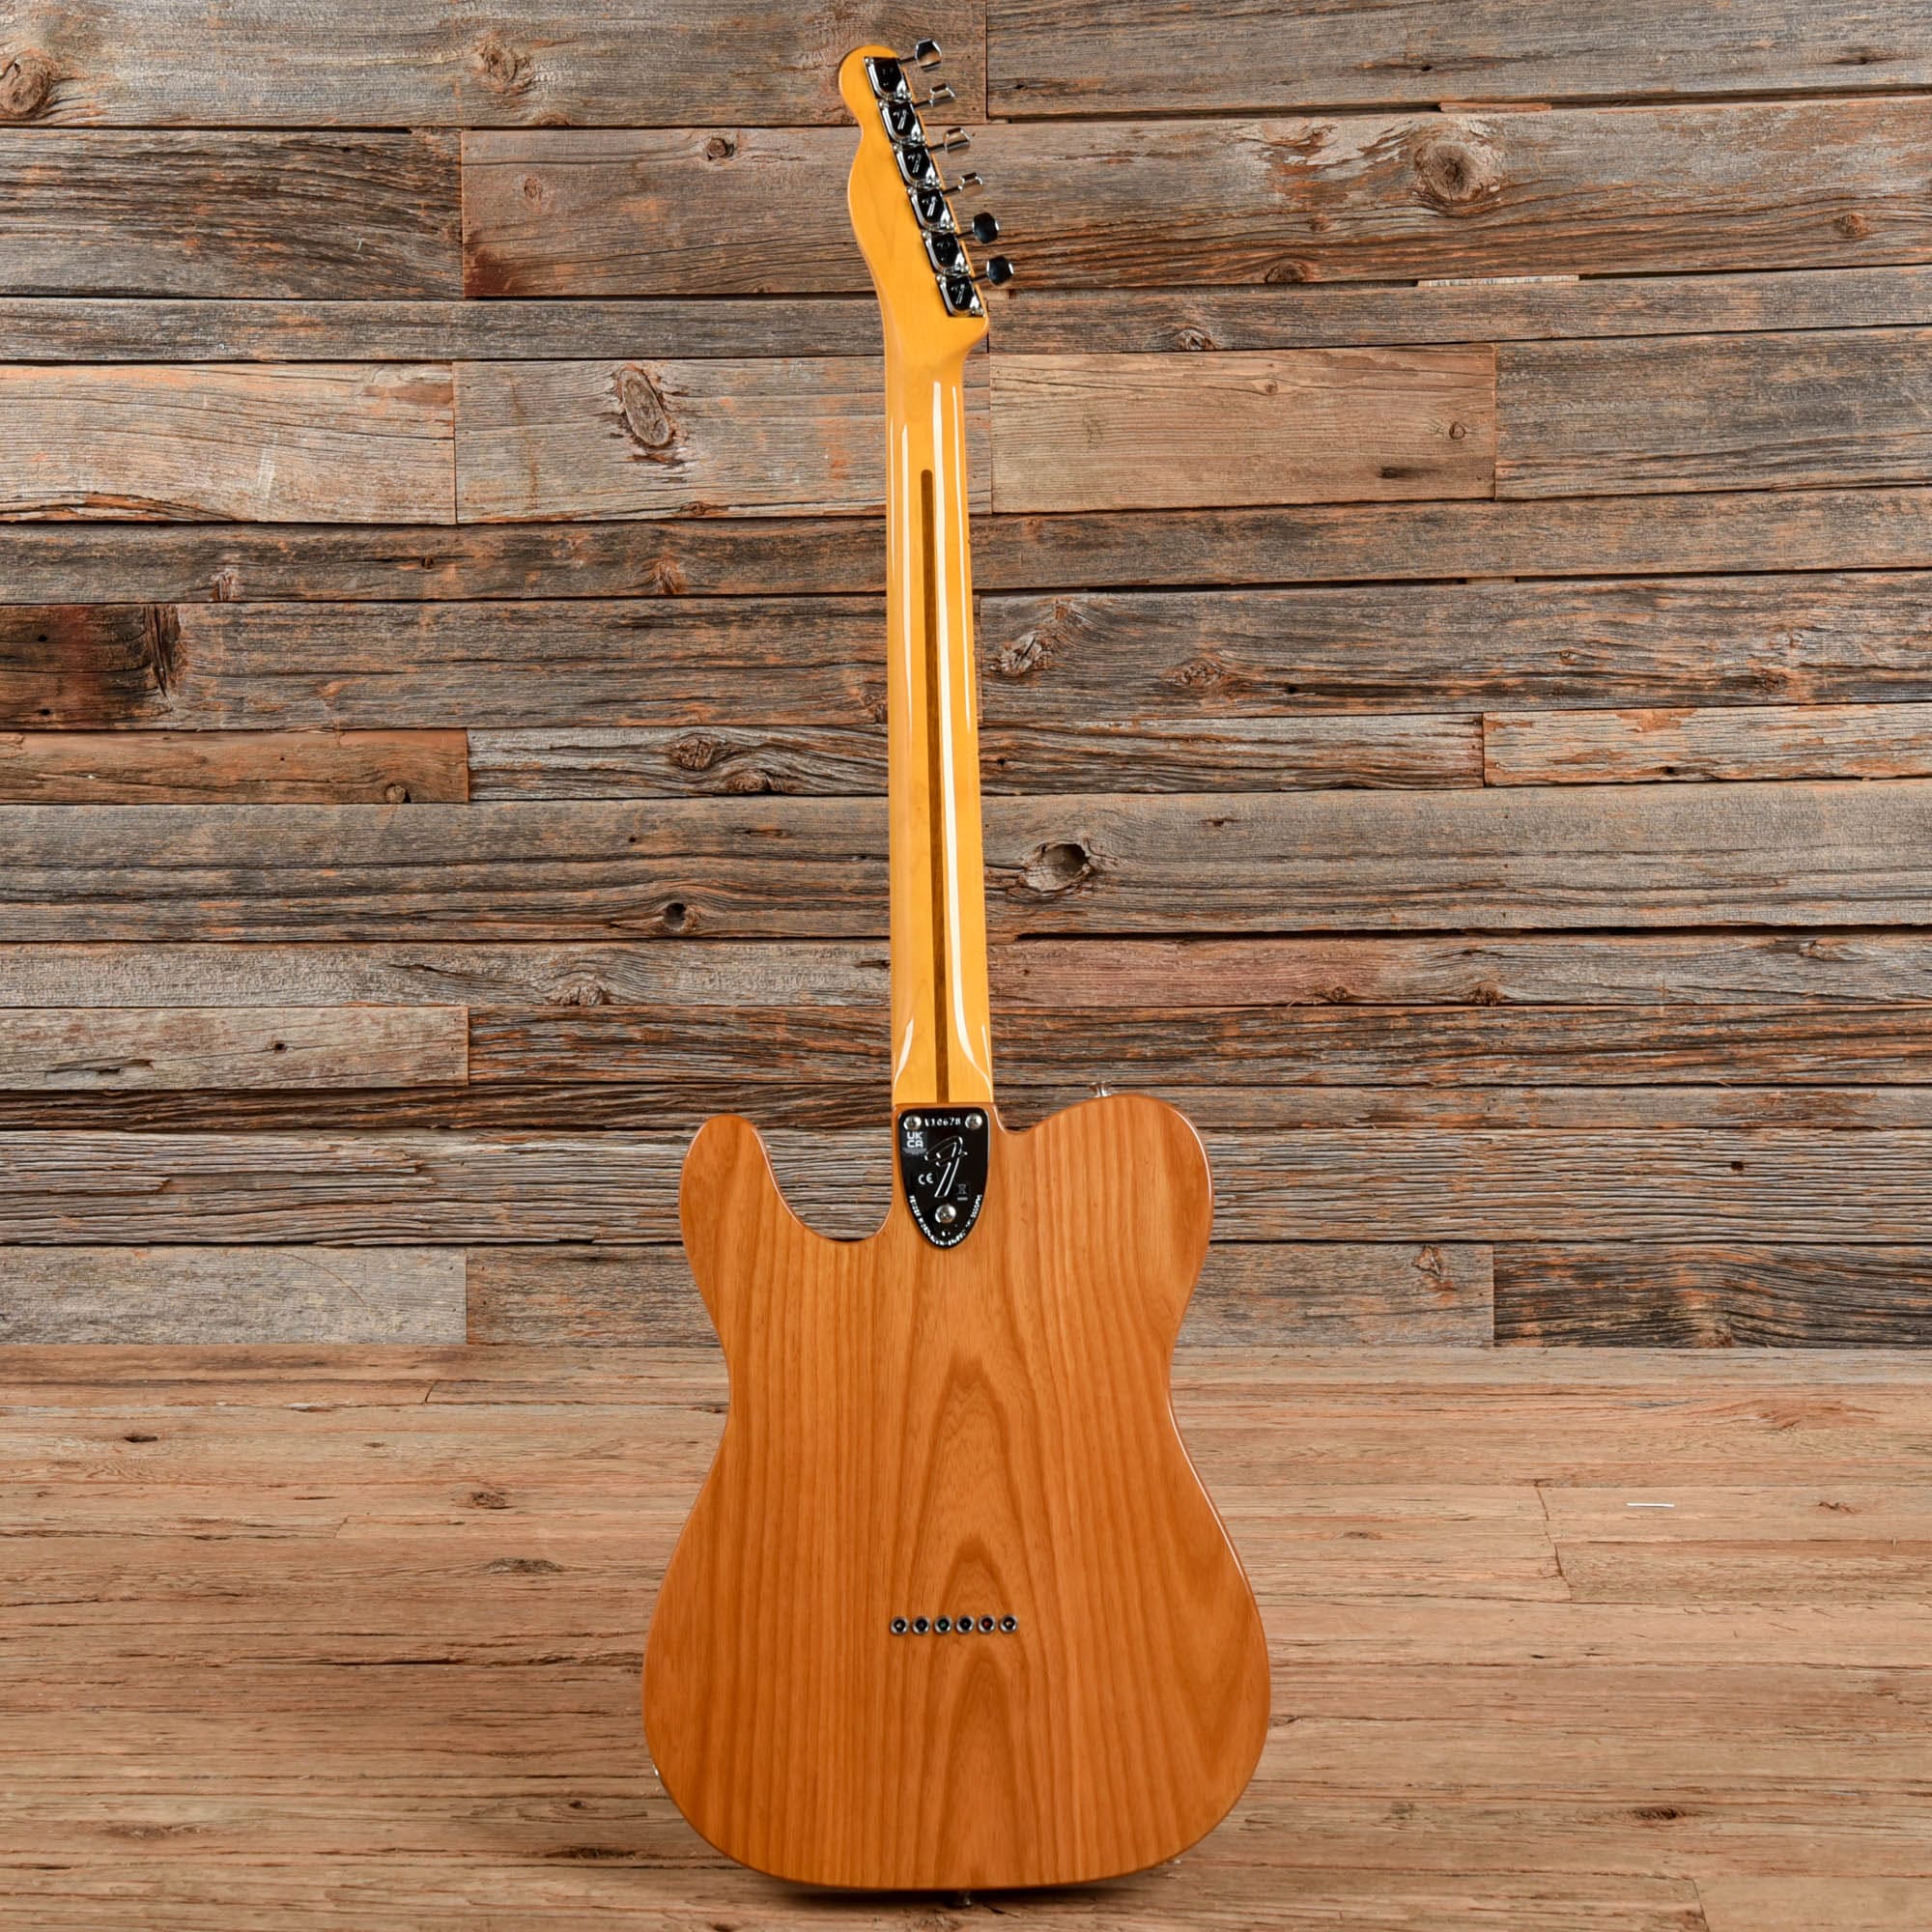 Fender American Vintage II 72 Telecaster Thinline Natural 2022 Electric Guitars / Semi-Hollow